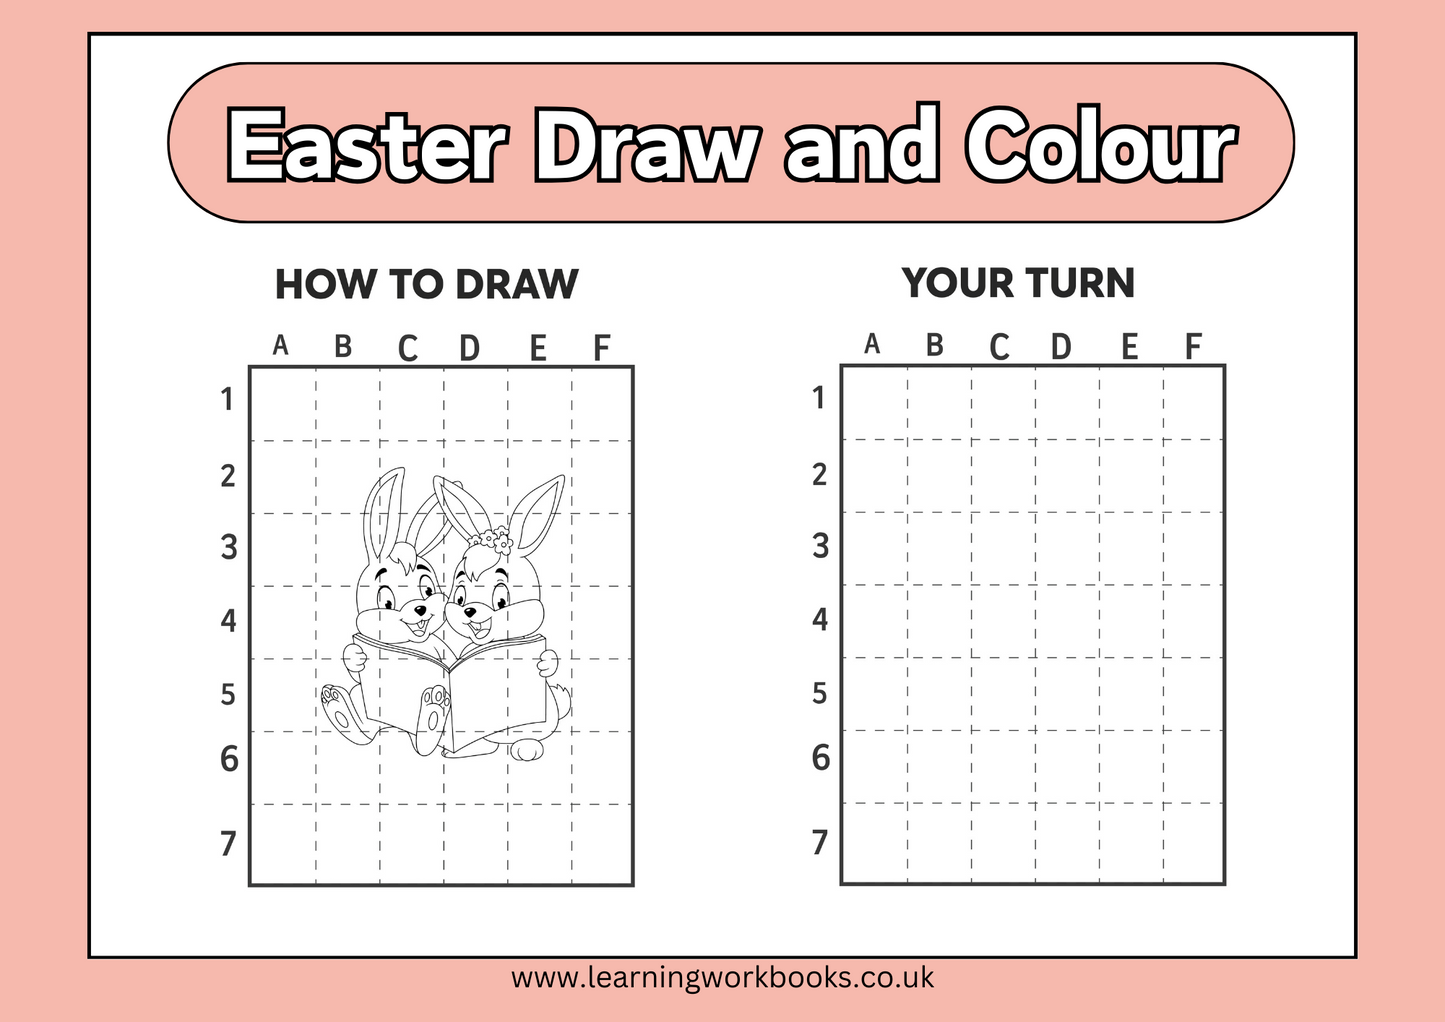 Easter Draw and Colour Book 1